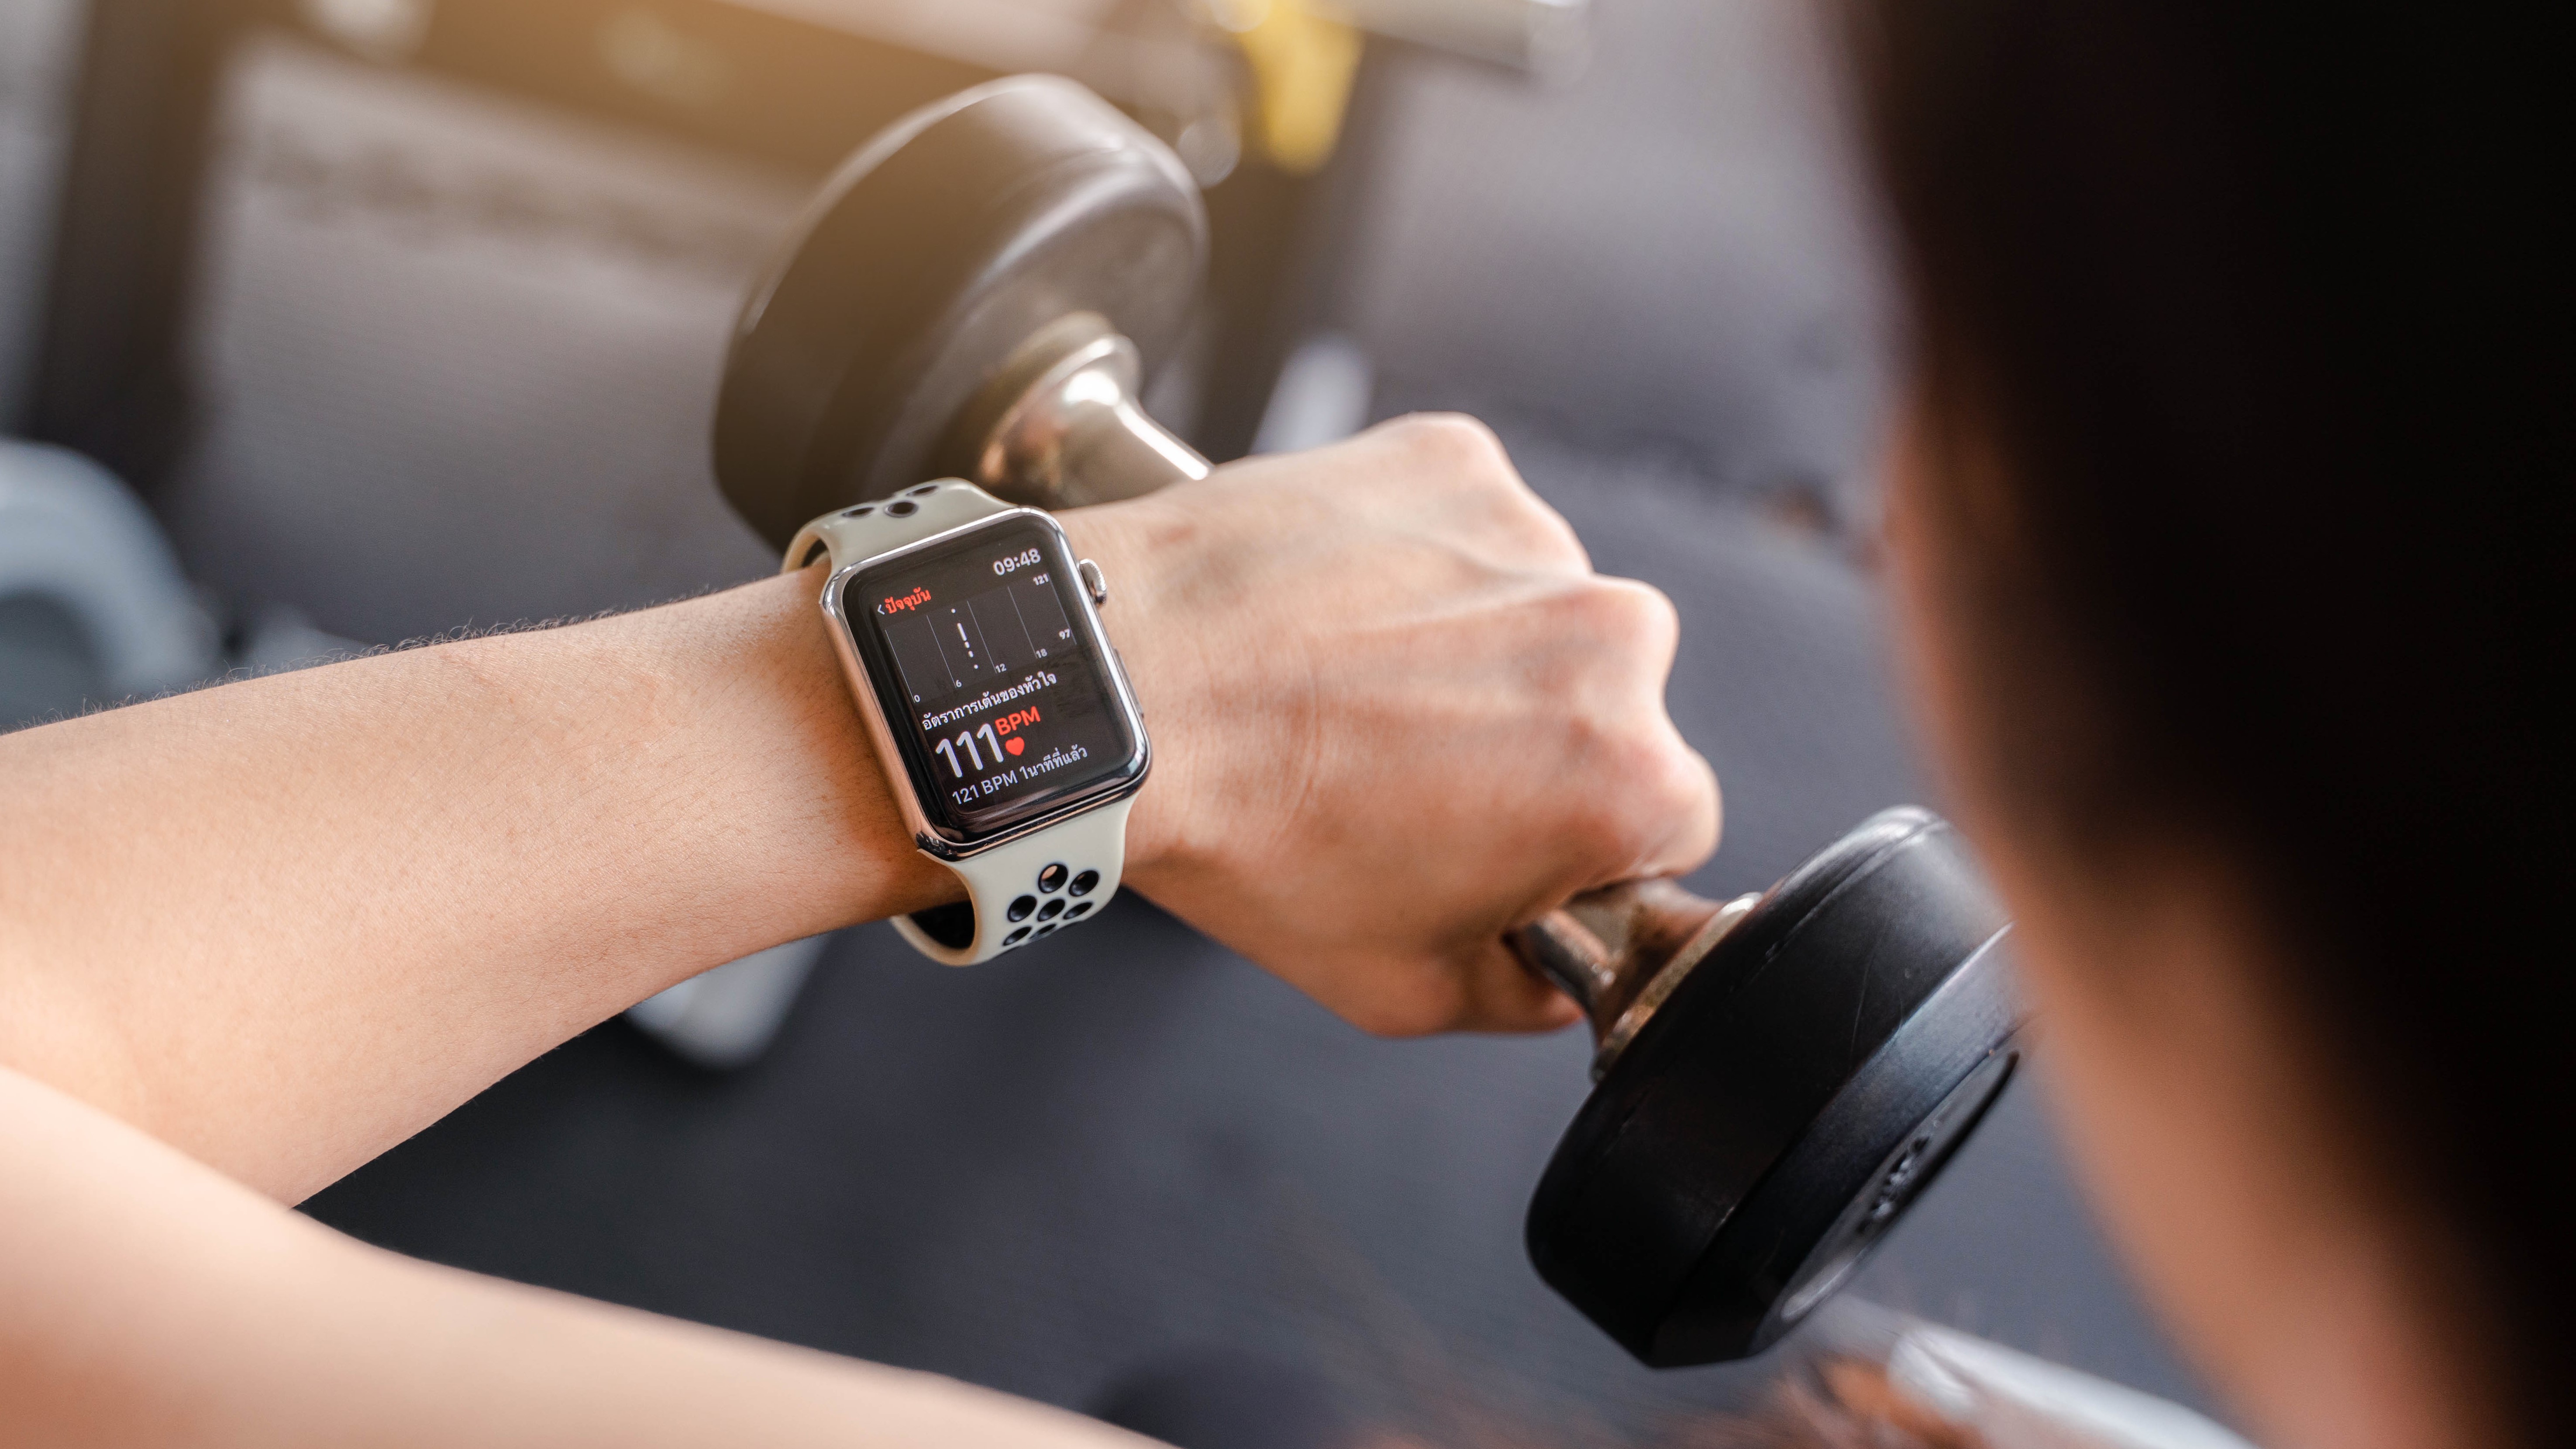 An image showing a person using an Apple Watch while exercising